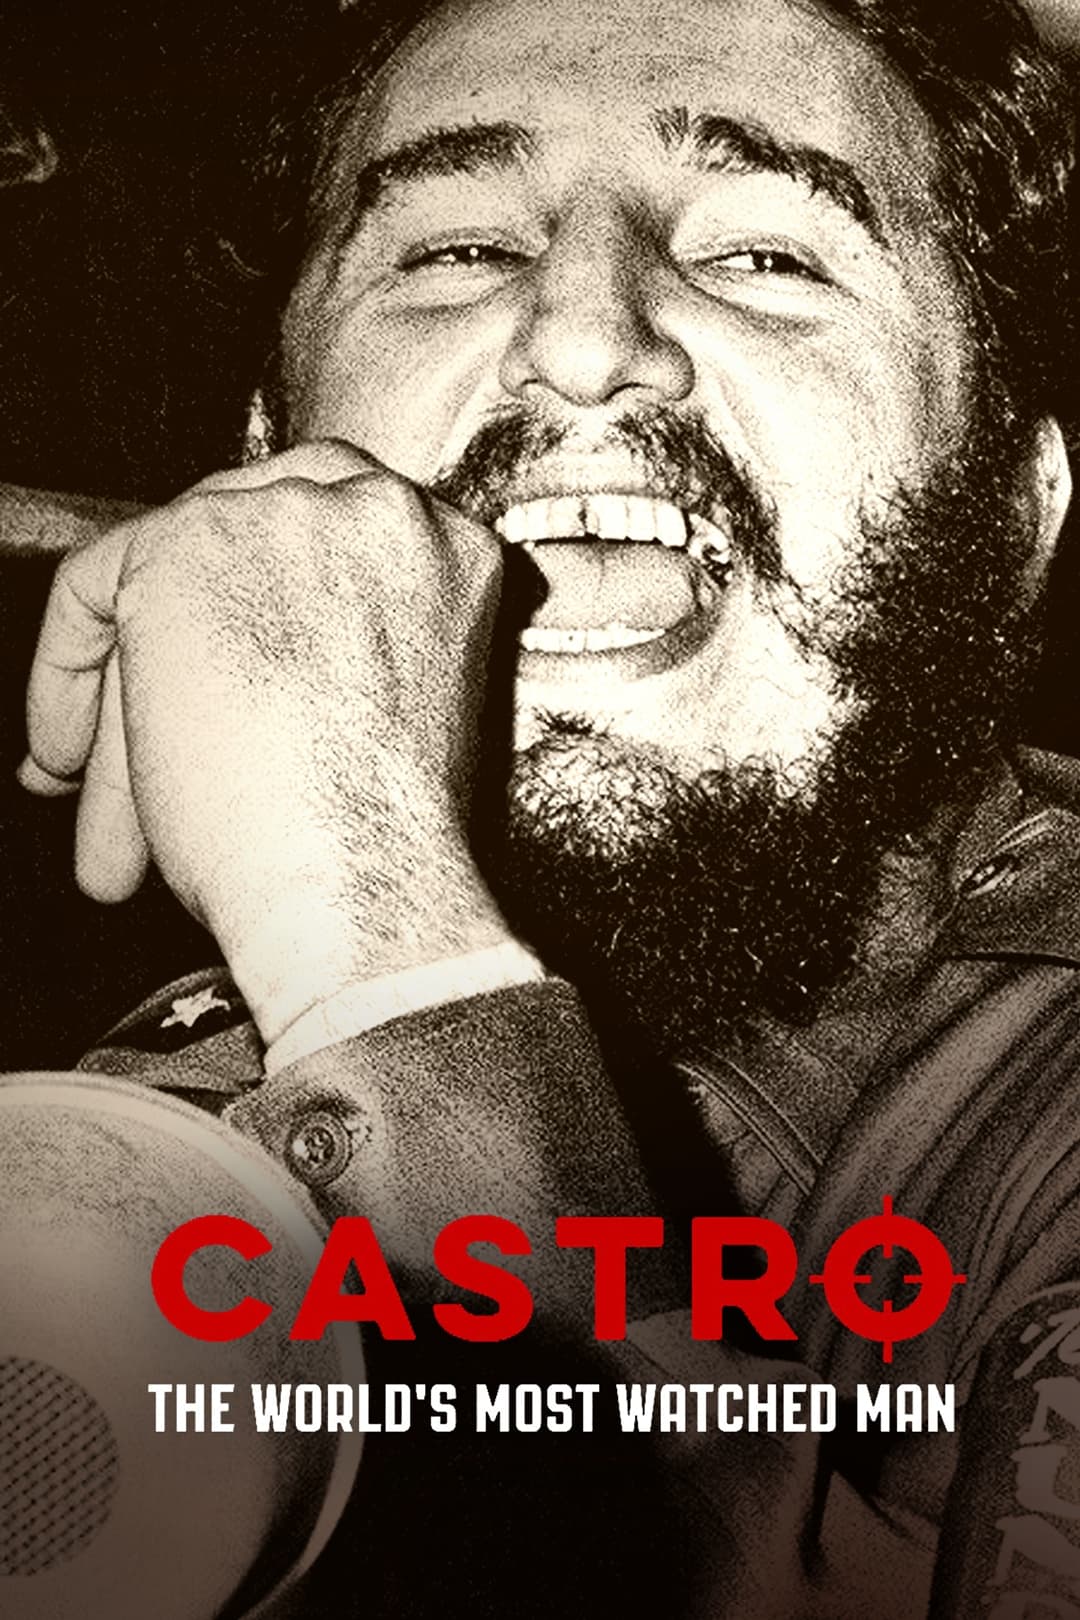 Castro: The World's Most Watched Man